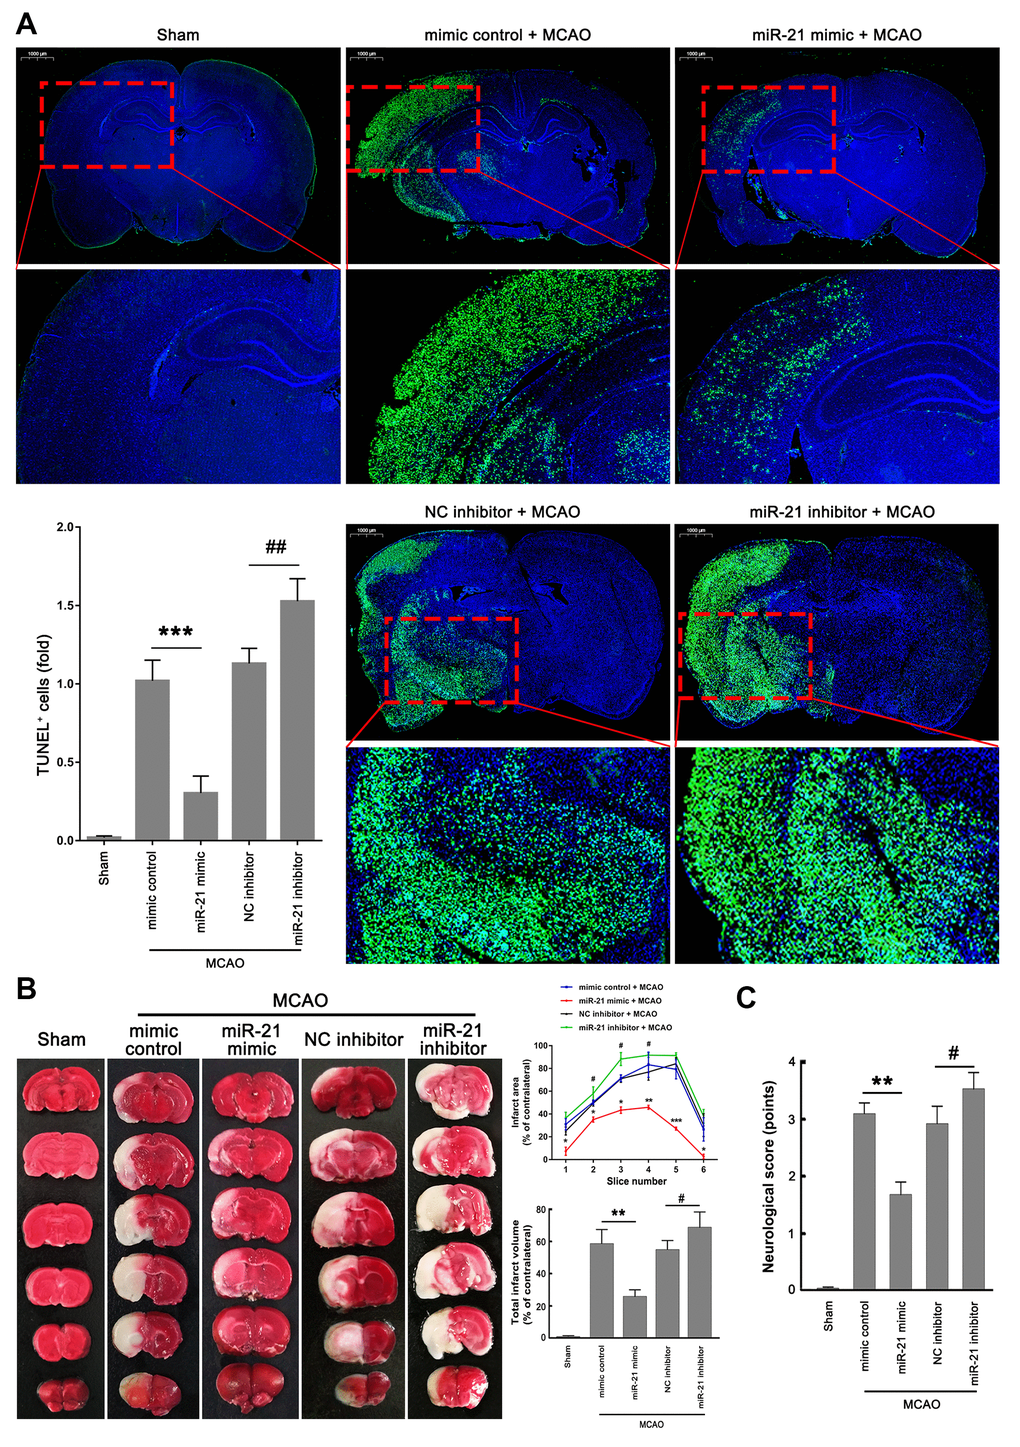 MiR-21/p53/Bcl-2/Bax signaling regulates ischemic neuronal injury in vivo. (A) Representative images showed the TUNEL-labeled cells in the brain slices. Bar graph summarized the numbers of TUNEL+ cells (fold) in the ischemic region. Scale bar, 1000μm. (B) Brain infarction was visualized by TTC staining at 24 h after operation. Curve lines summarized infarct areas in the ipsilateral hemisphere normalized to the total areas of the contralateral hemisphere in sequential coronal brain slices. Bar graph showed the volumes of total cerebral infarct in the ipsilateral hemisphere normalized to the total volumes of the contralateral hemisphere. (C) Neurologic deficits were analyzed by a neurologic deficit score. Eight mice were randomly selected from each treatment group. *, mimic control + MCAO group vs. miR-21 mimic + MCAO group. *P≤0.05, **P≤0.01, ***P≤0.001. #, NC inhibitor + MCAO group vs. miR-21 inhibitor + MCAO group. #P≤0.05, ##P≤0.01.